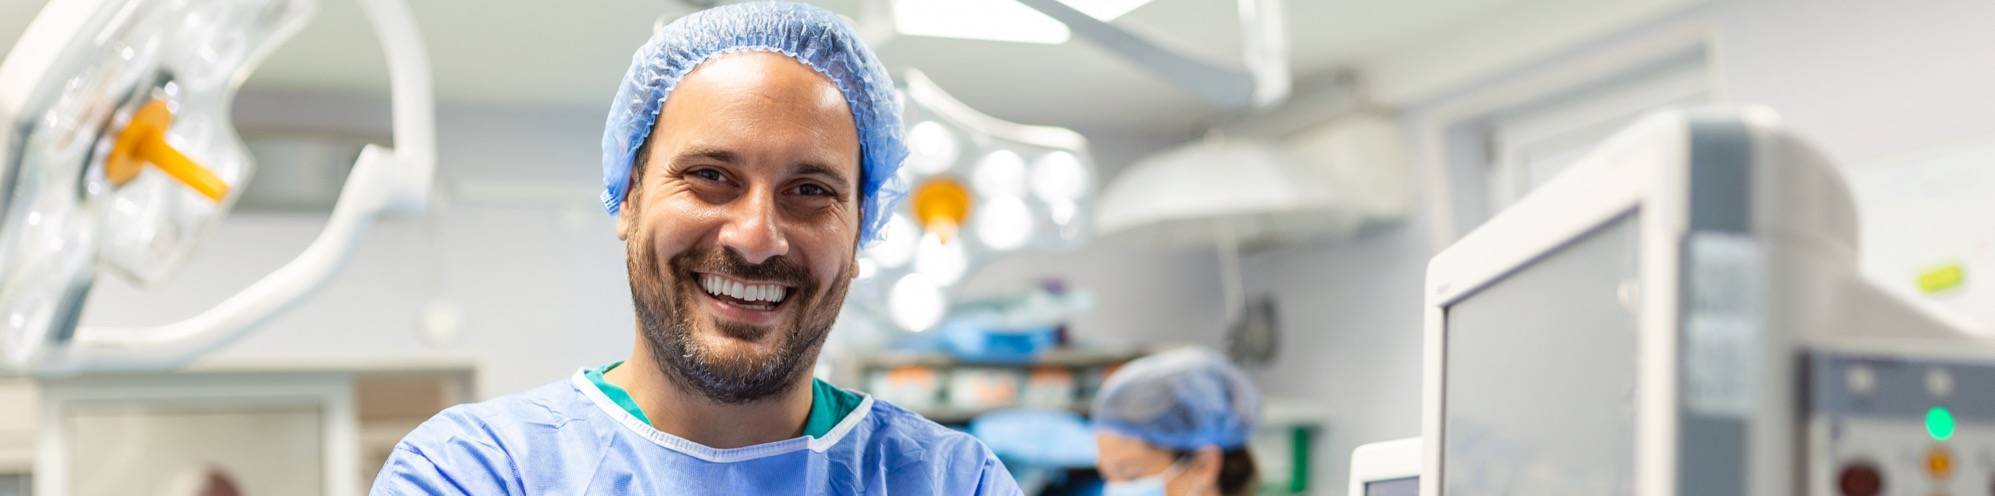 Surgical Technician in an Operating room 